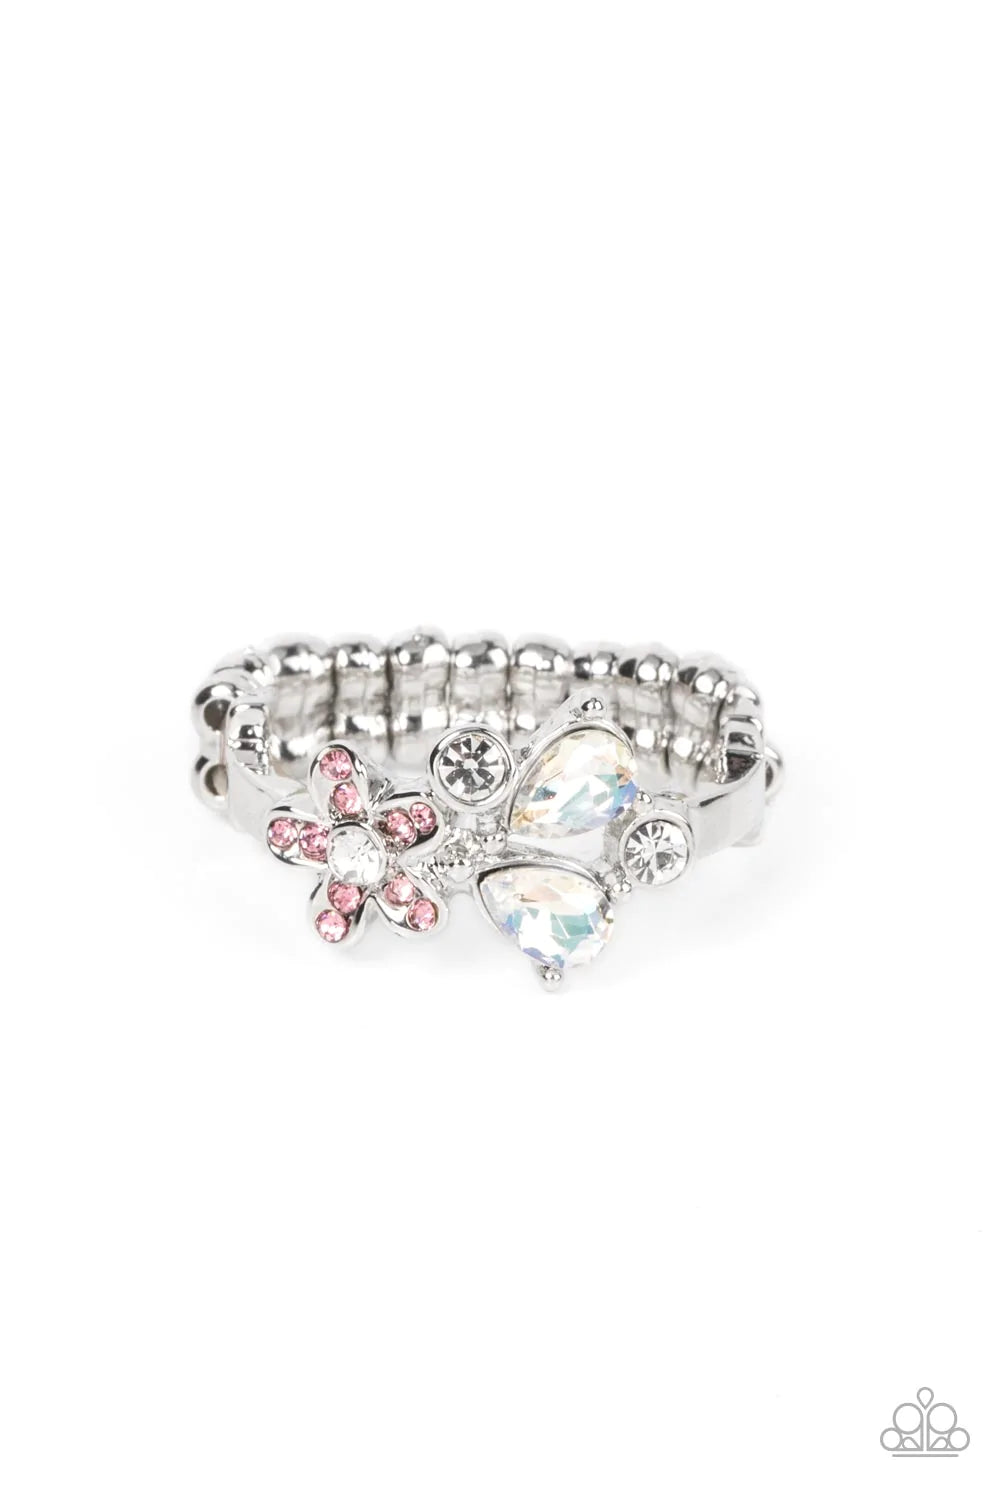 Paparazzi Accessories Enchanting Efflorescence - Pink A pink rhinestone dotted floral frame joins round and teardrop white rhinestones atop a dainty silver band, blooming into an enchanting centerpiece across the finger. Features a dainty stretchy band fo